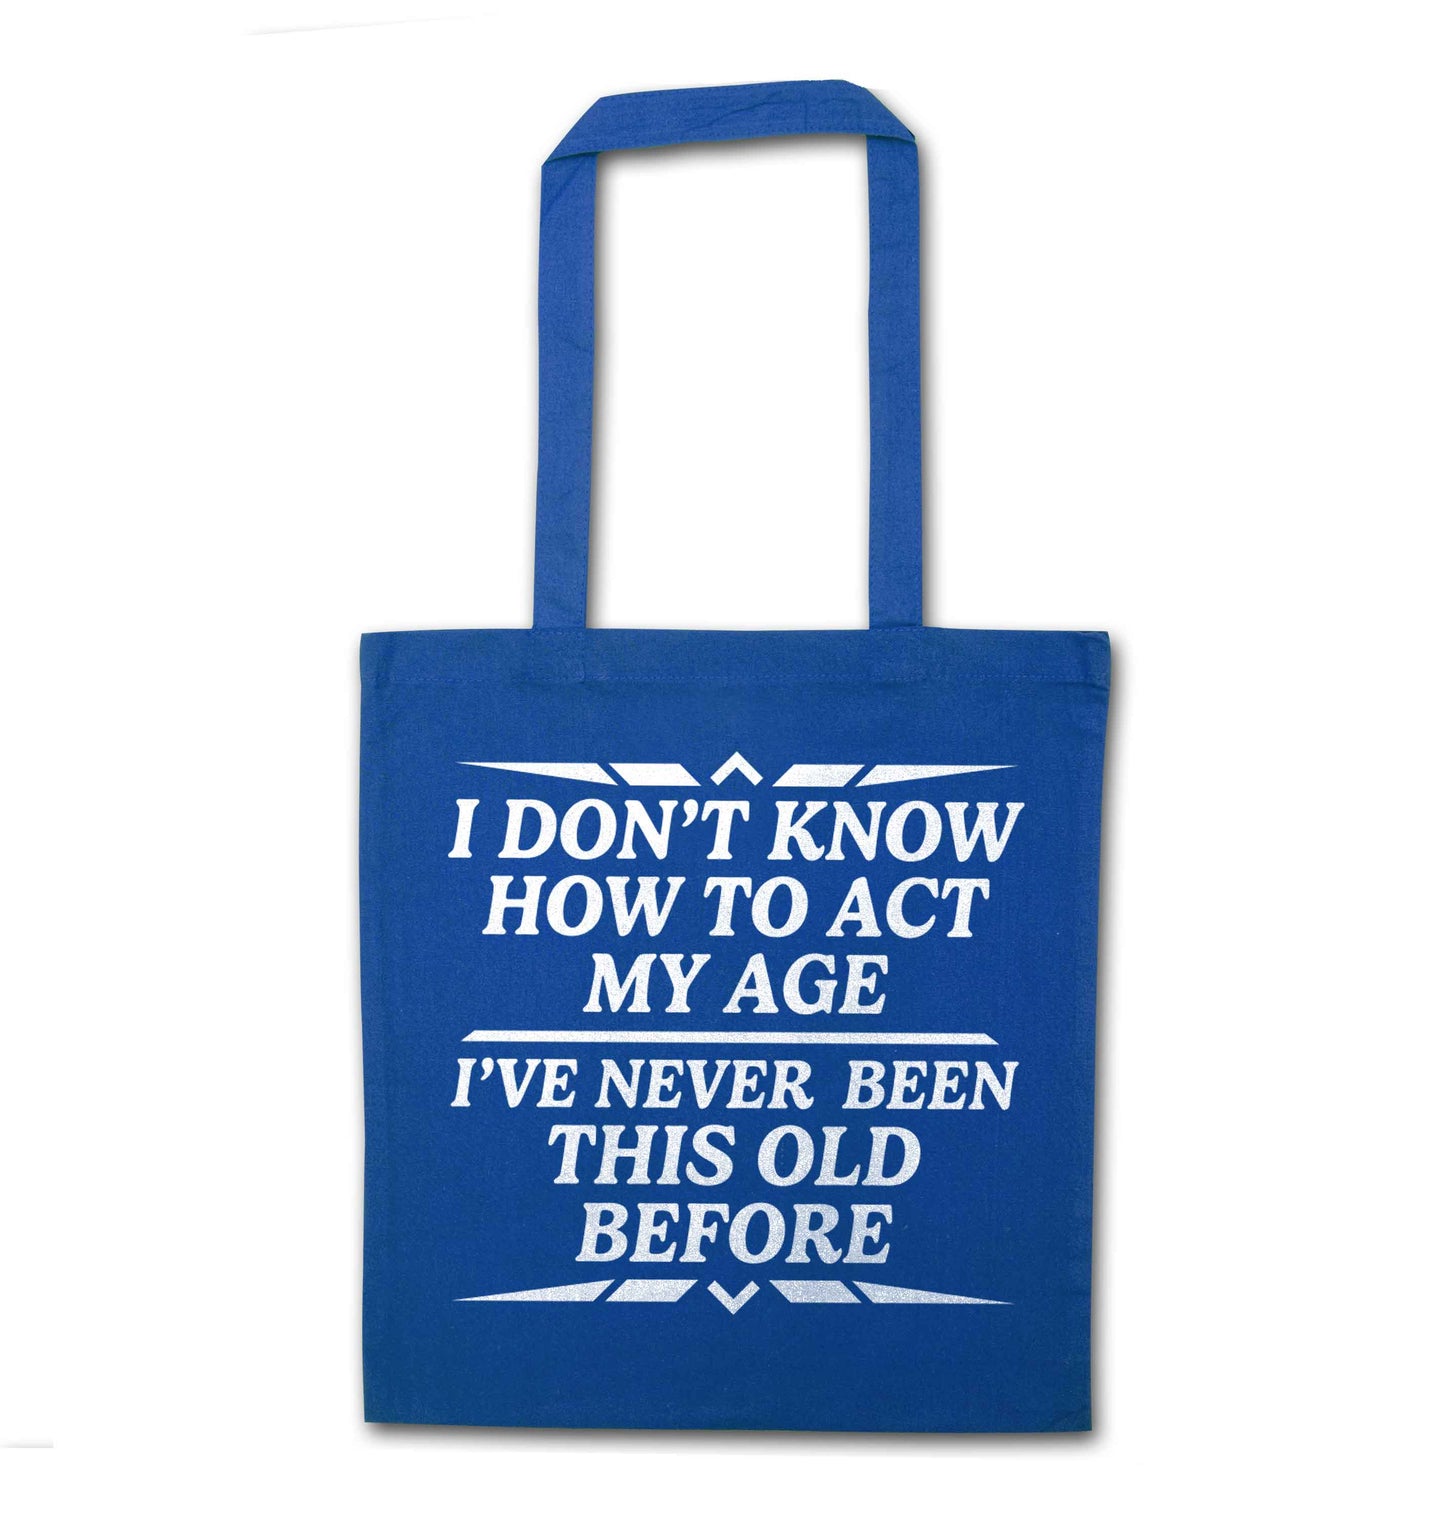 I don't know how to act my age I've never been this old before blue tote bag